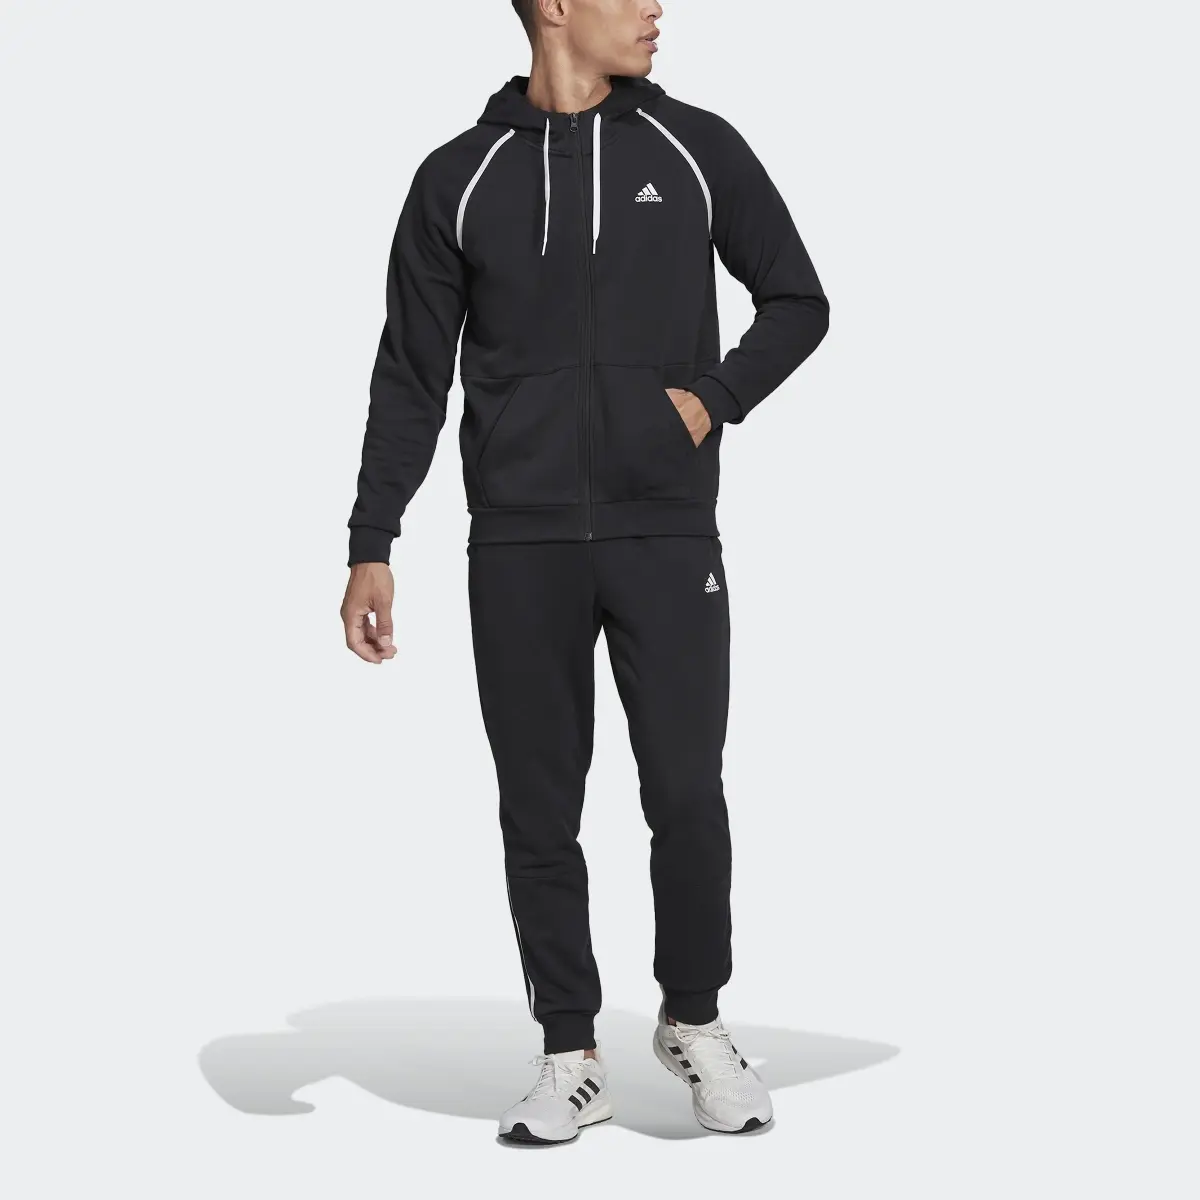 Adidas Cotton Piping Tracksuit. 1